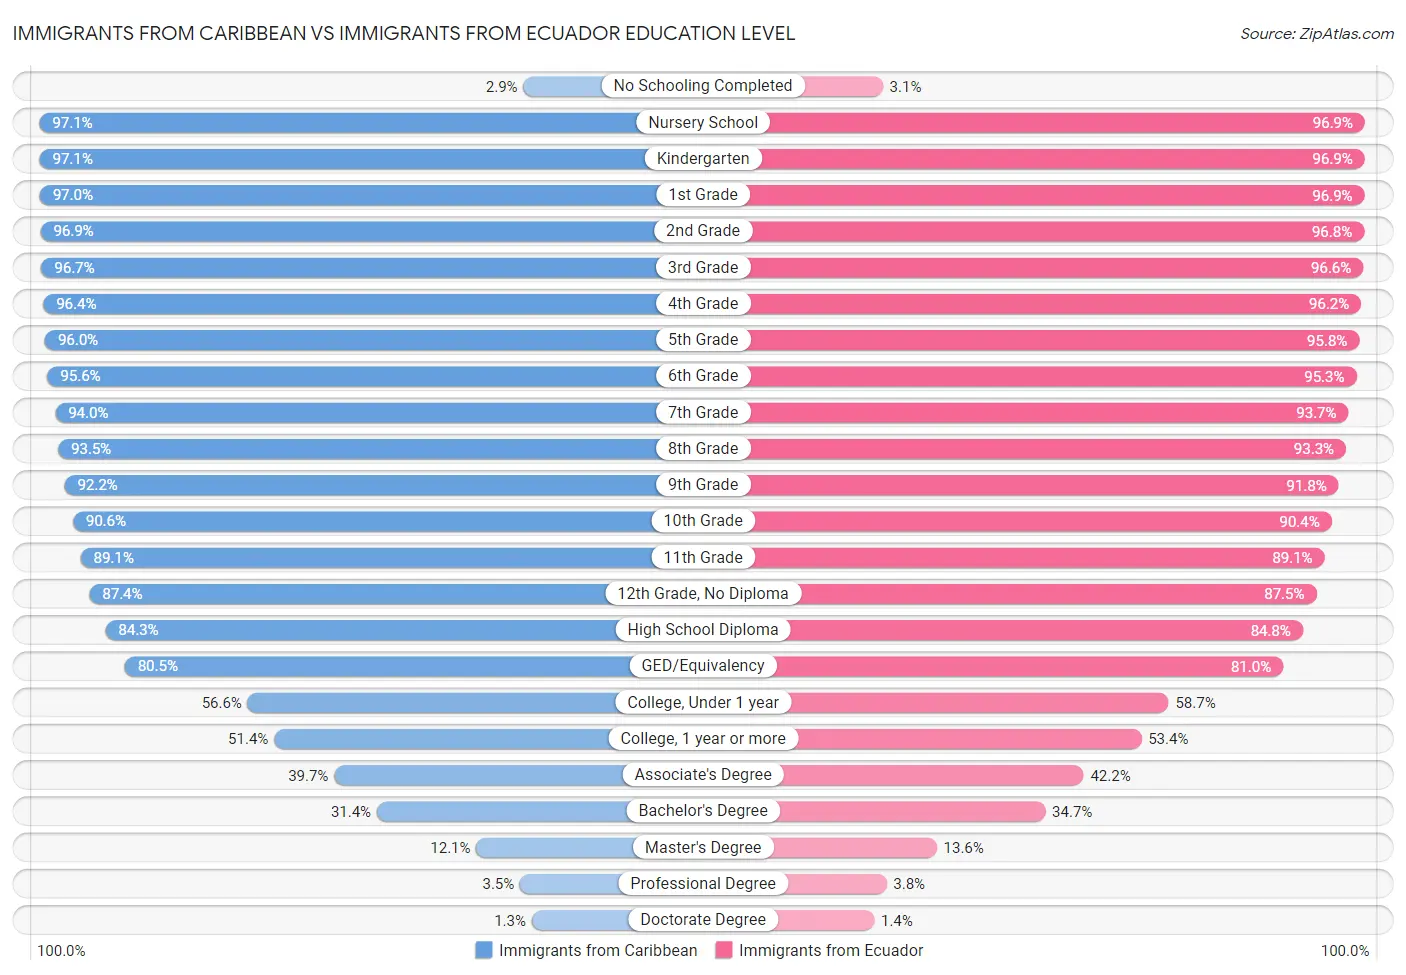 Immigrants from Caribbean vs Immigrants from Ecuador Education Level